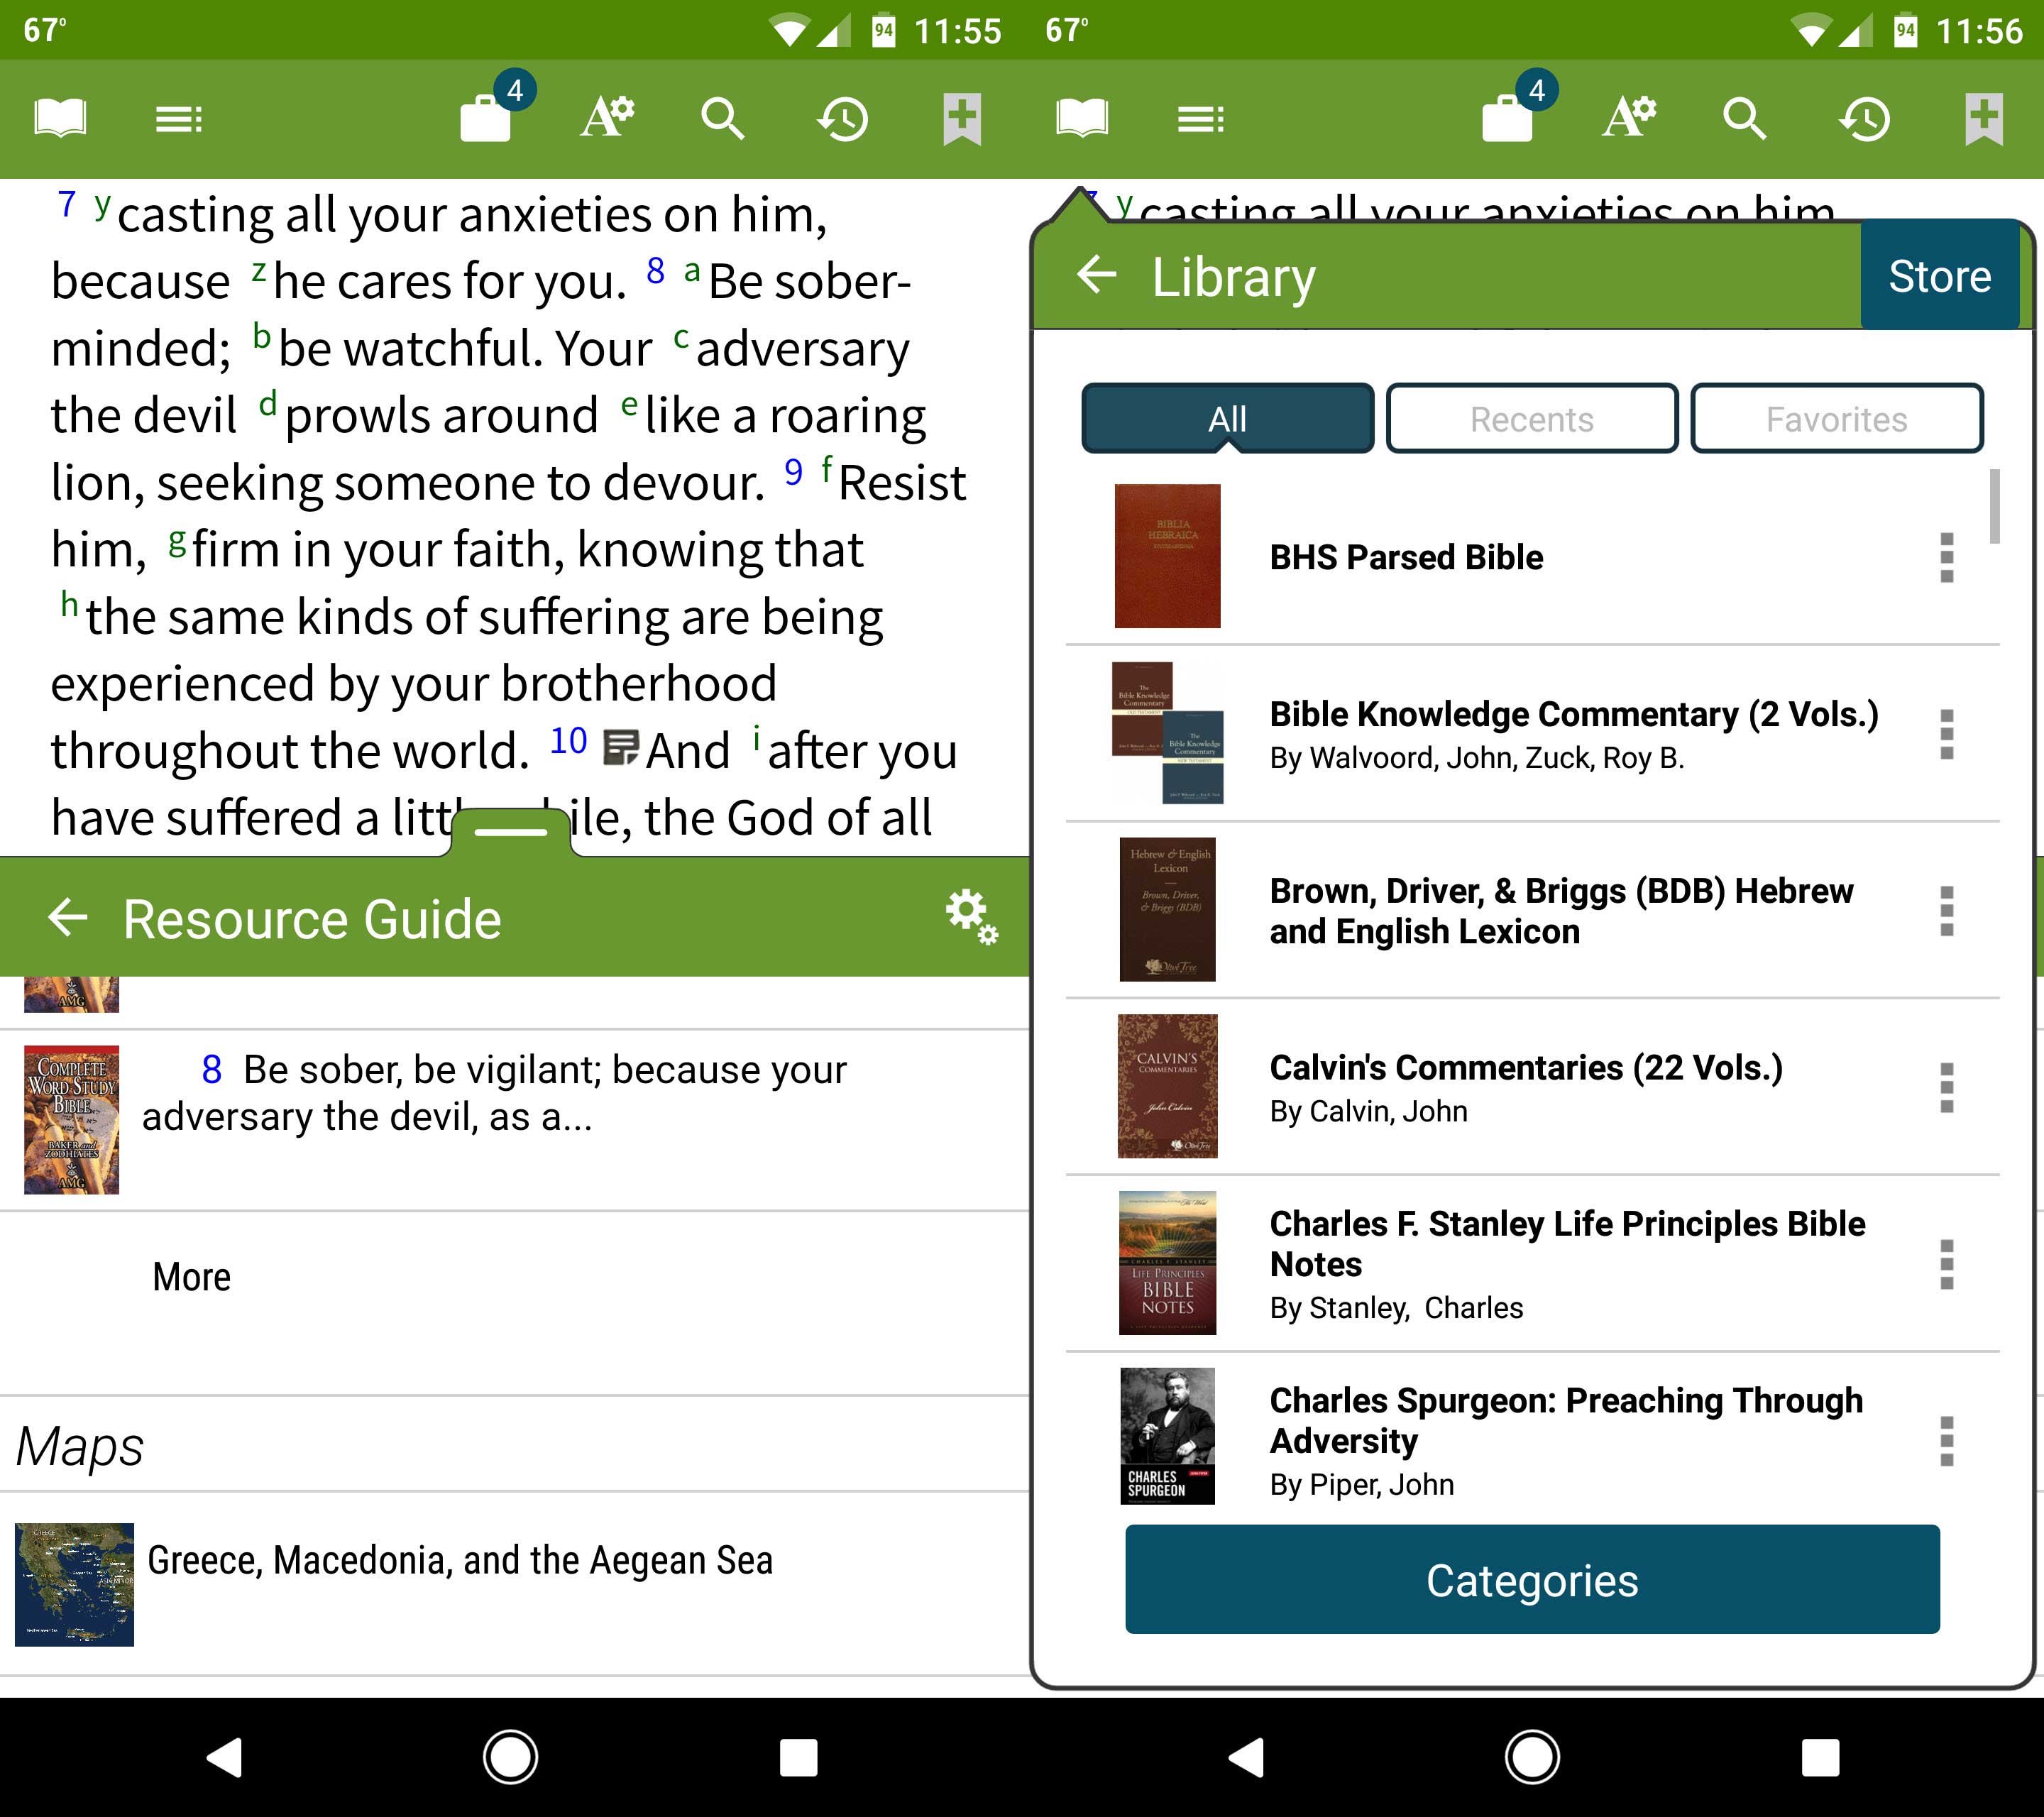 download bible app for android phone